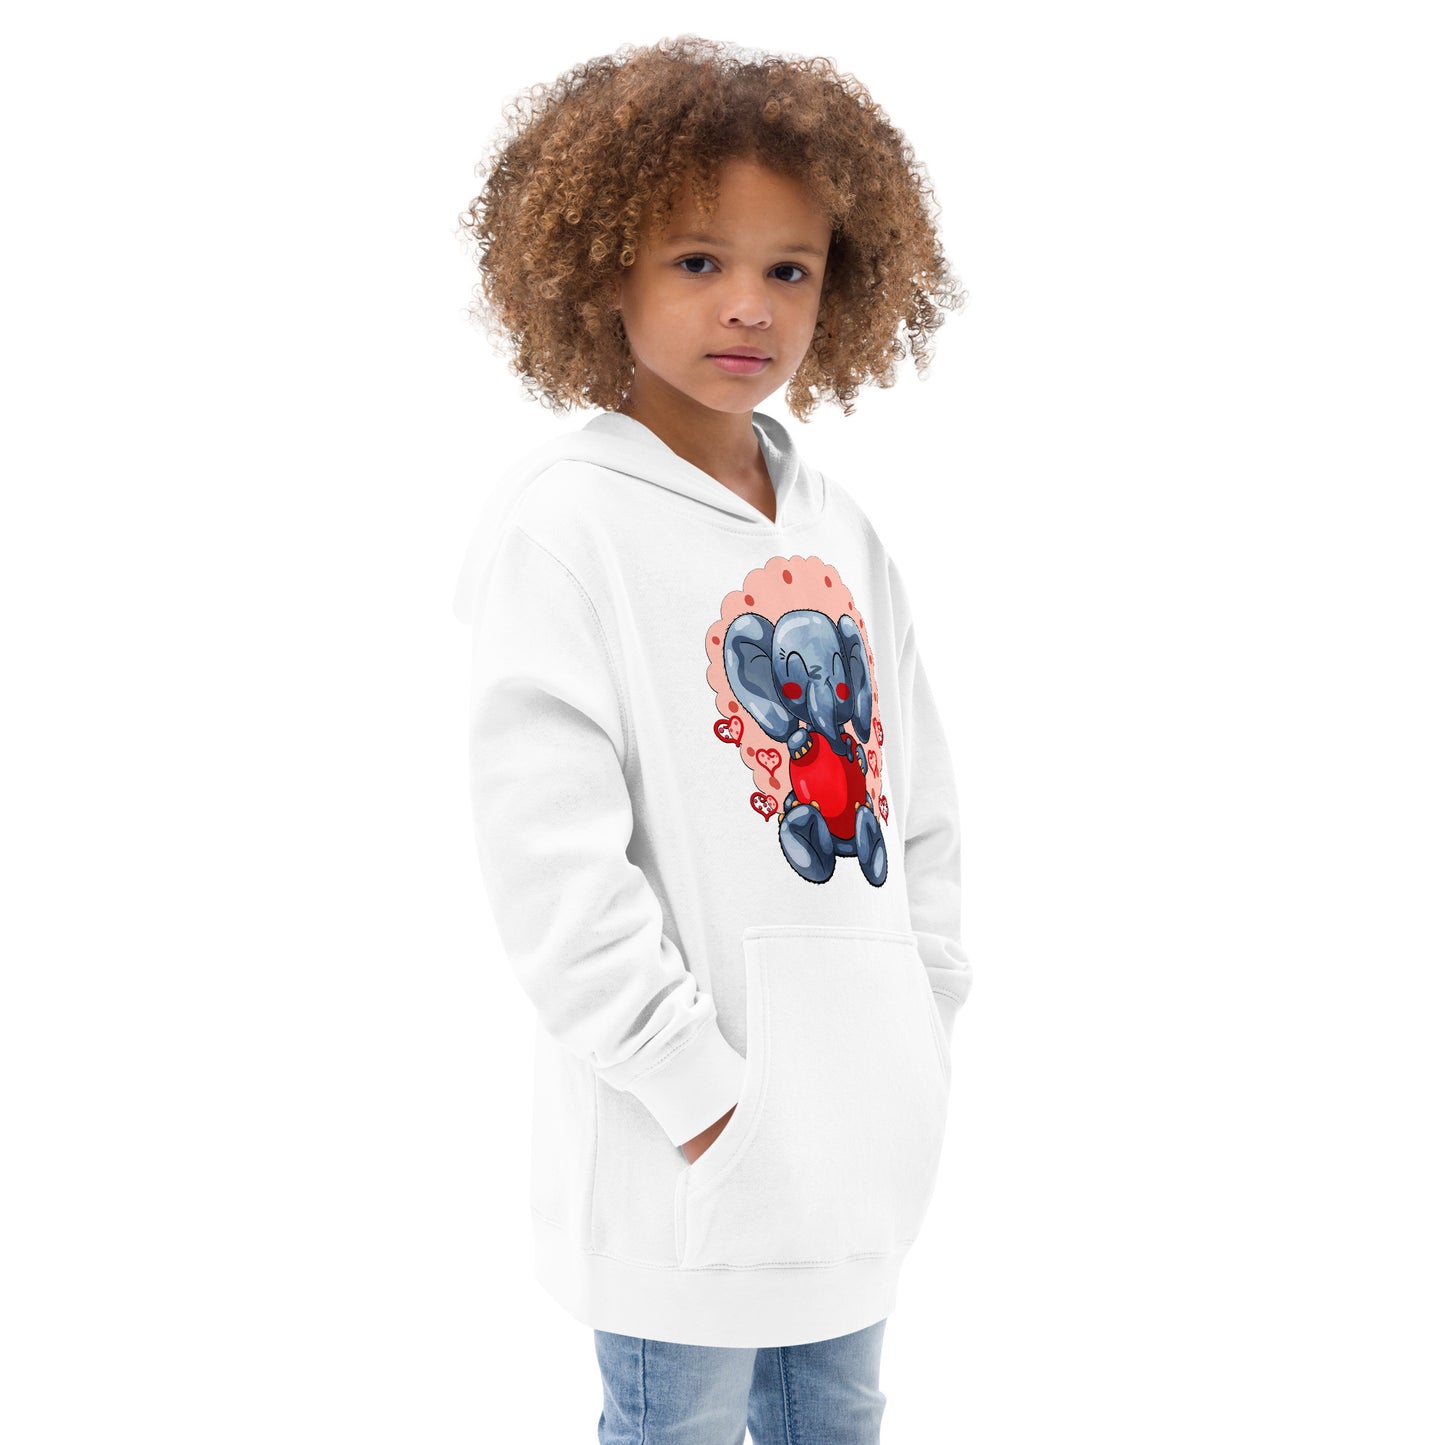 Funny Elephant with Heart Hoodie, No. 0415